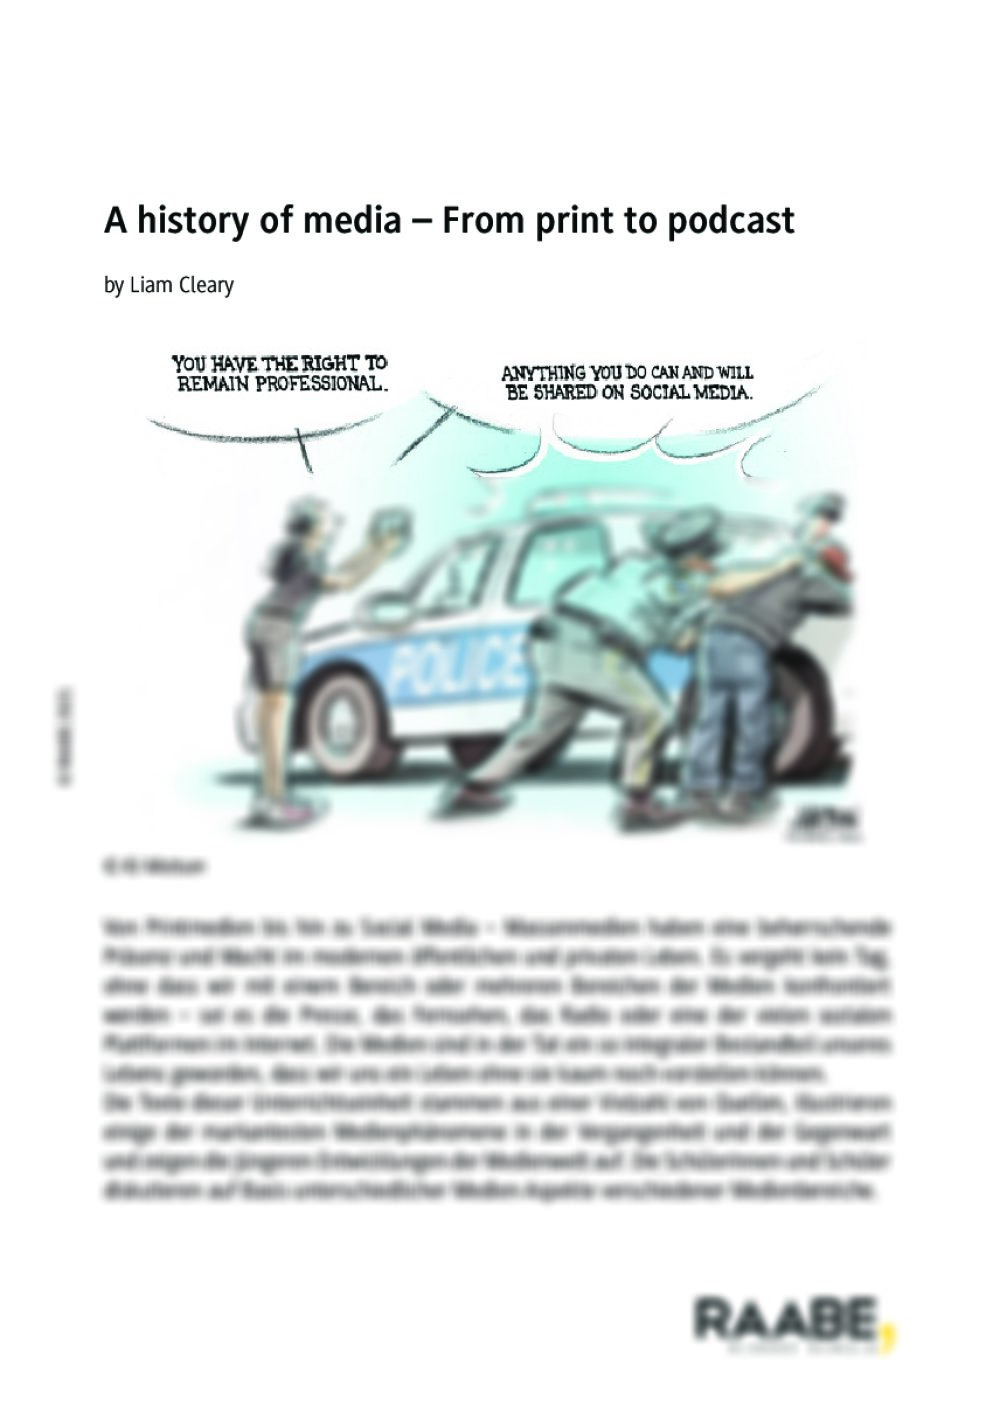 A history of media - Seite 1